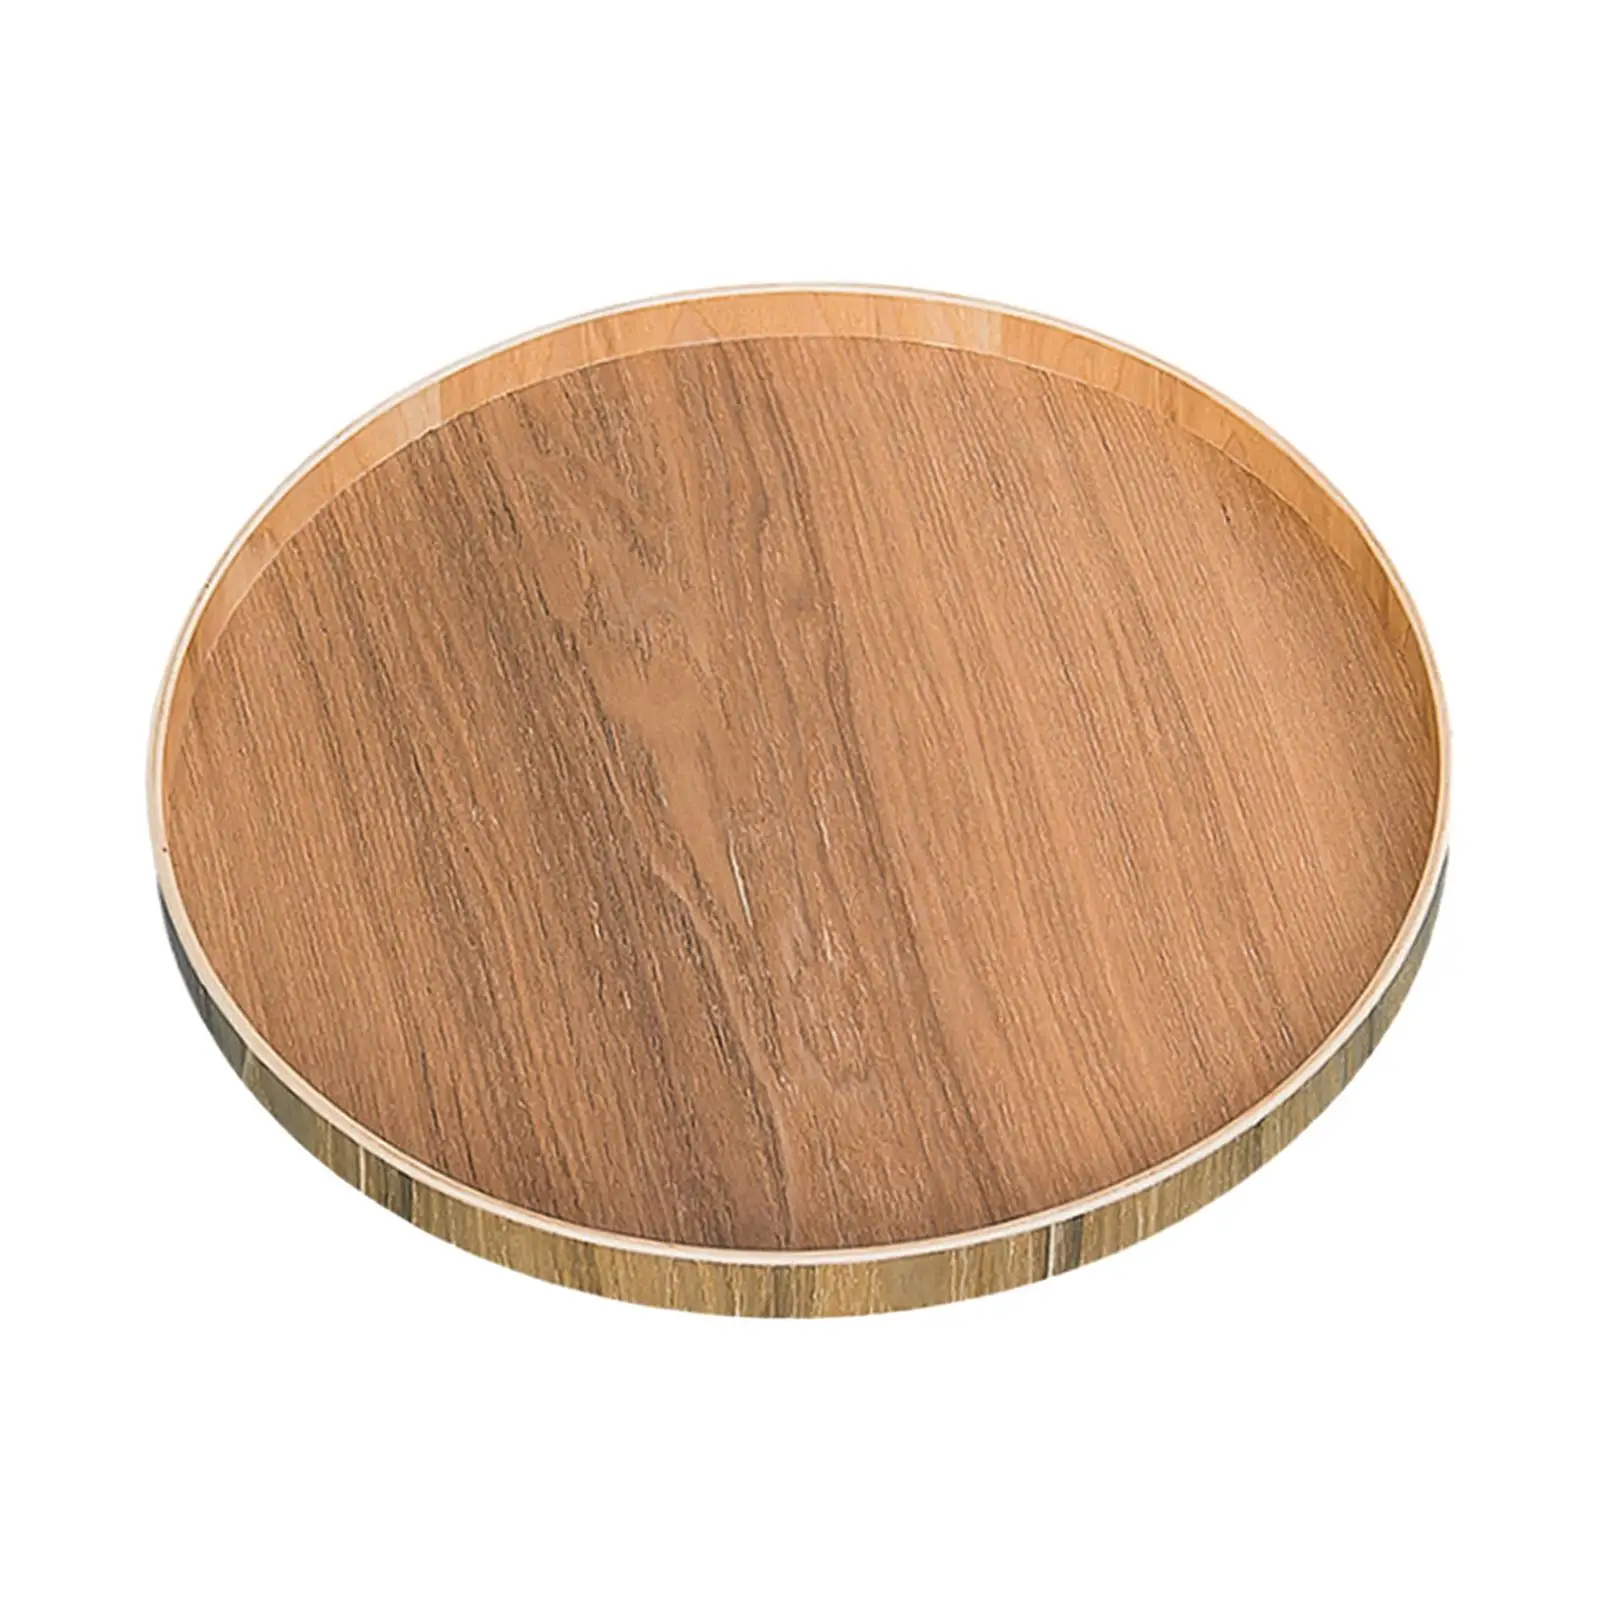 Round Serving Tray Multipurpose Farmhouse Decorative Tray Fruit Plate for Home Kitchen Countertop Dining Table Bathroom Pantry